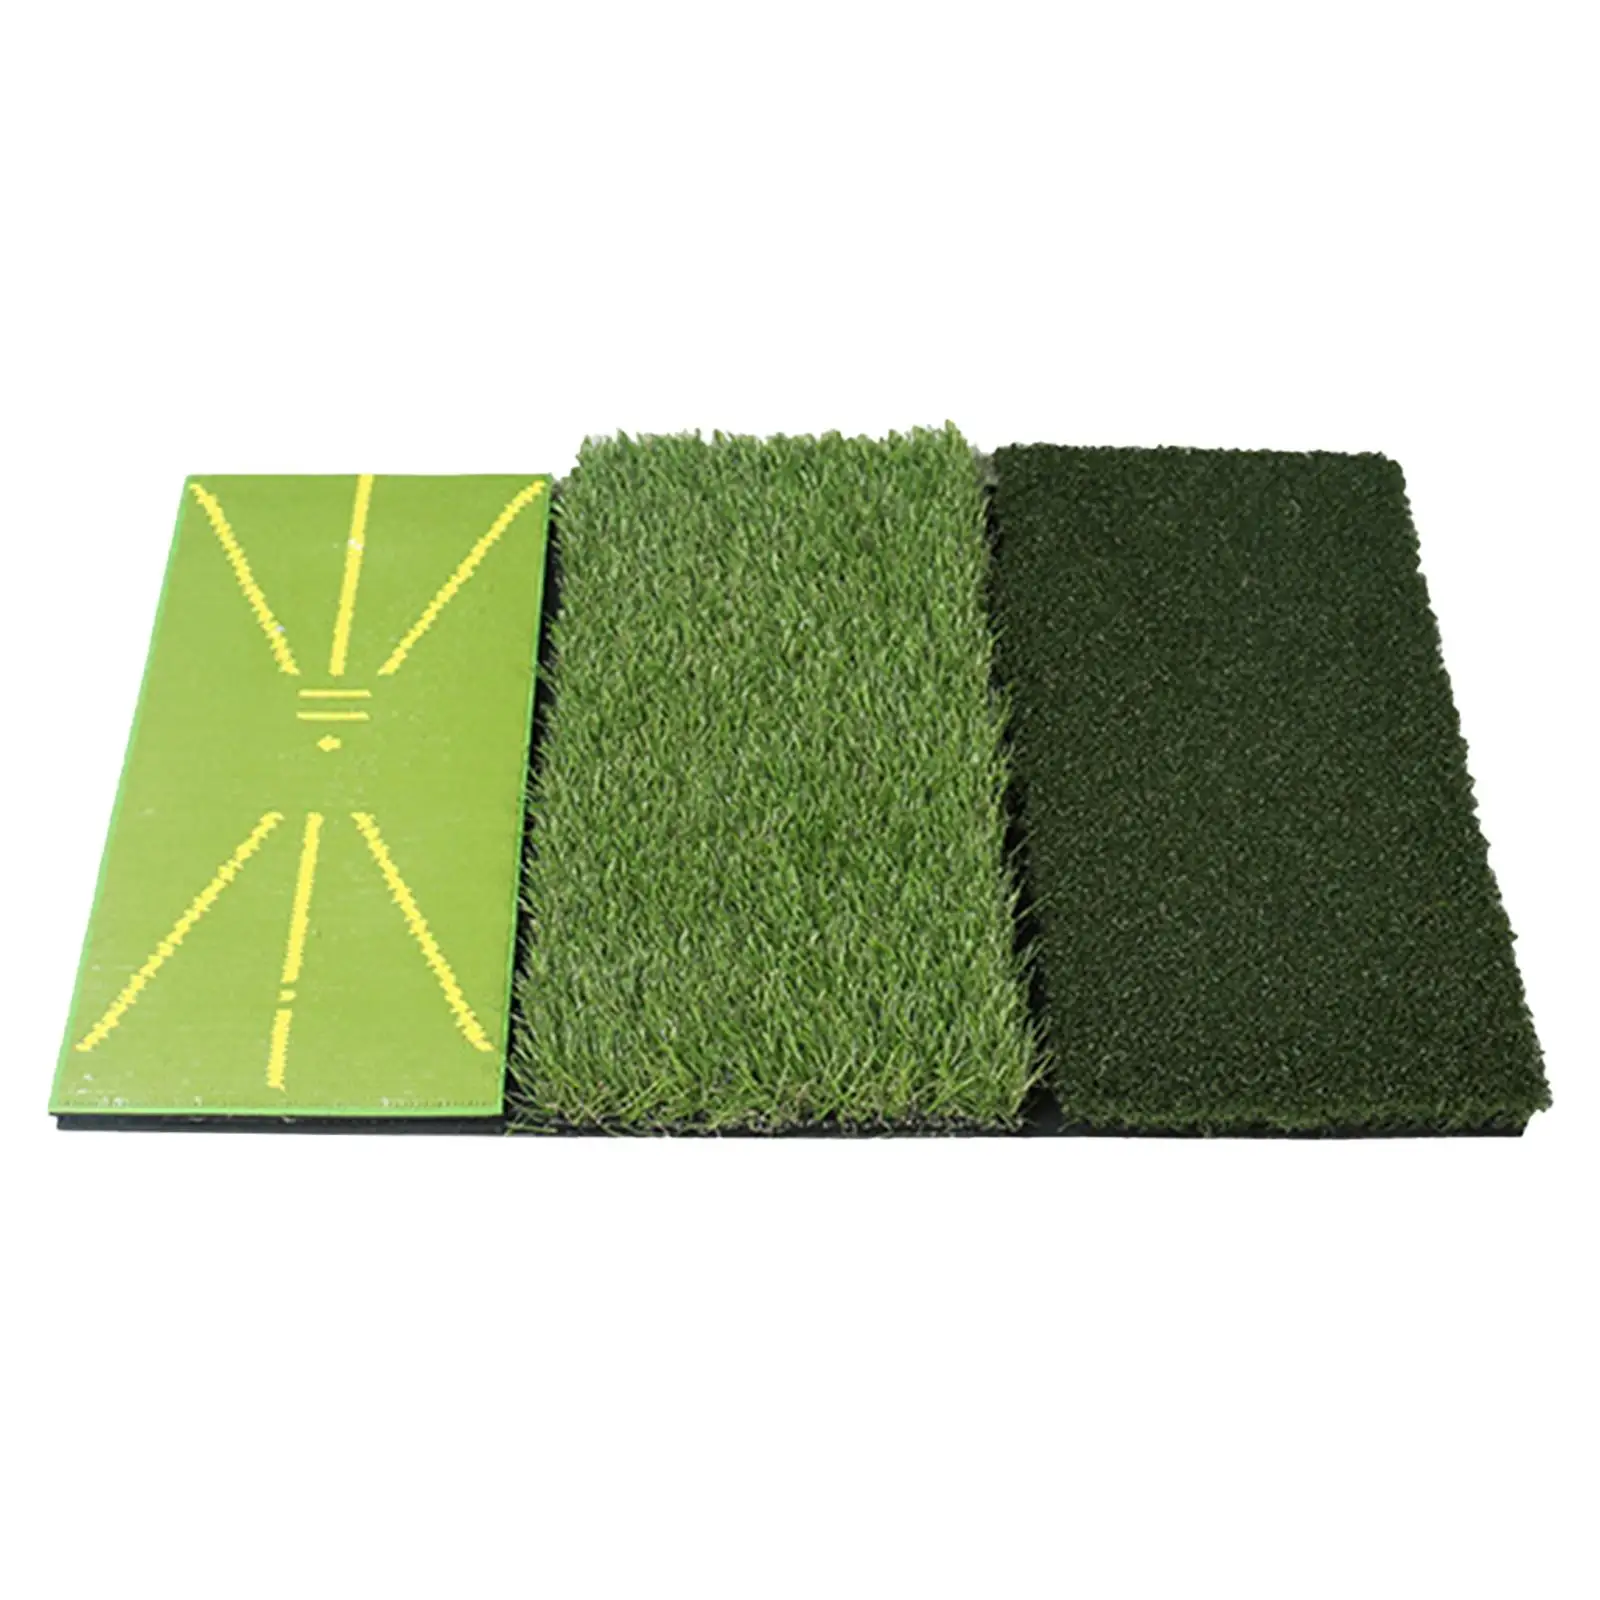 golf-hitting-mat-foldable-durable-portable-turf-mat-correct-hitting-posture-for-home-office-backyards-outdoors-garages-equipment